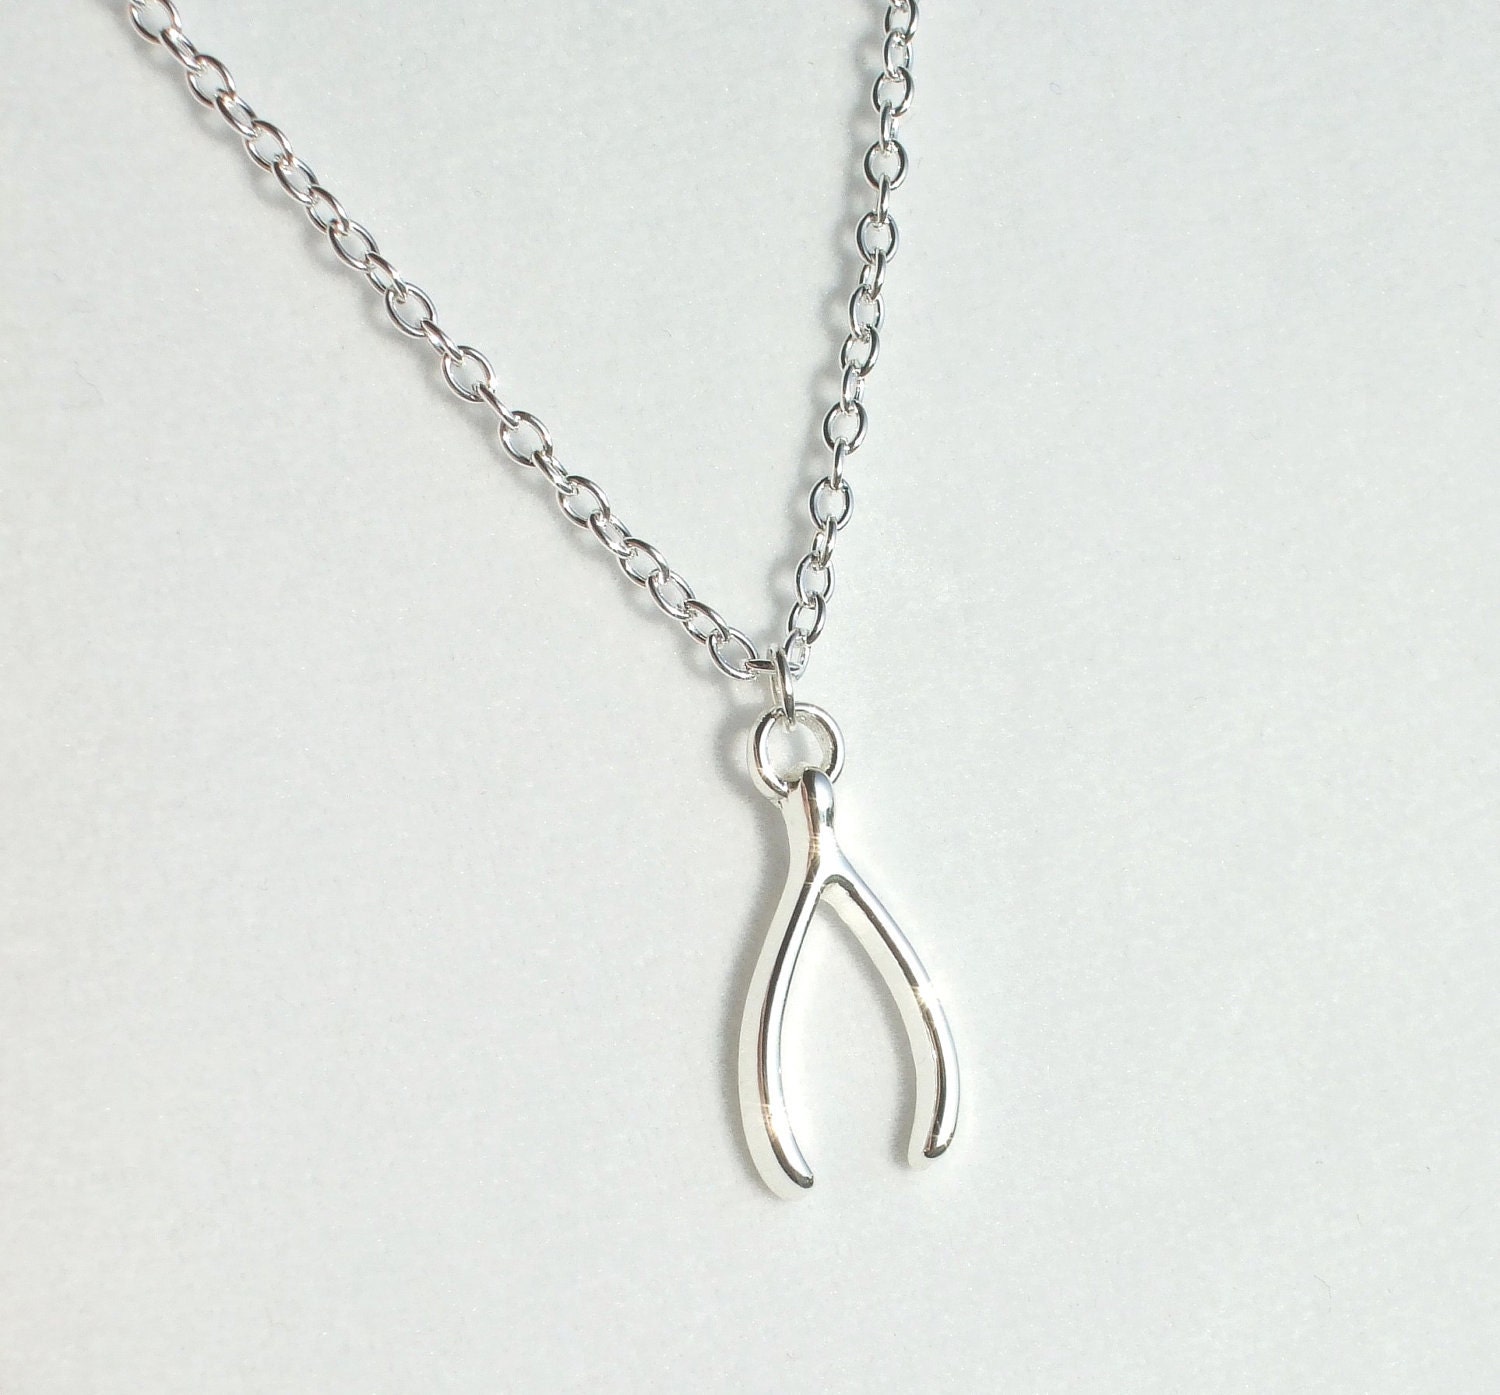 Silver Wishbone Necklace Make a Wish Silver Plated Luck